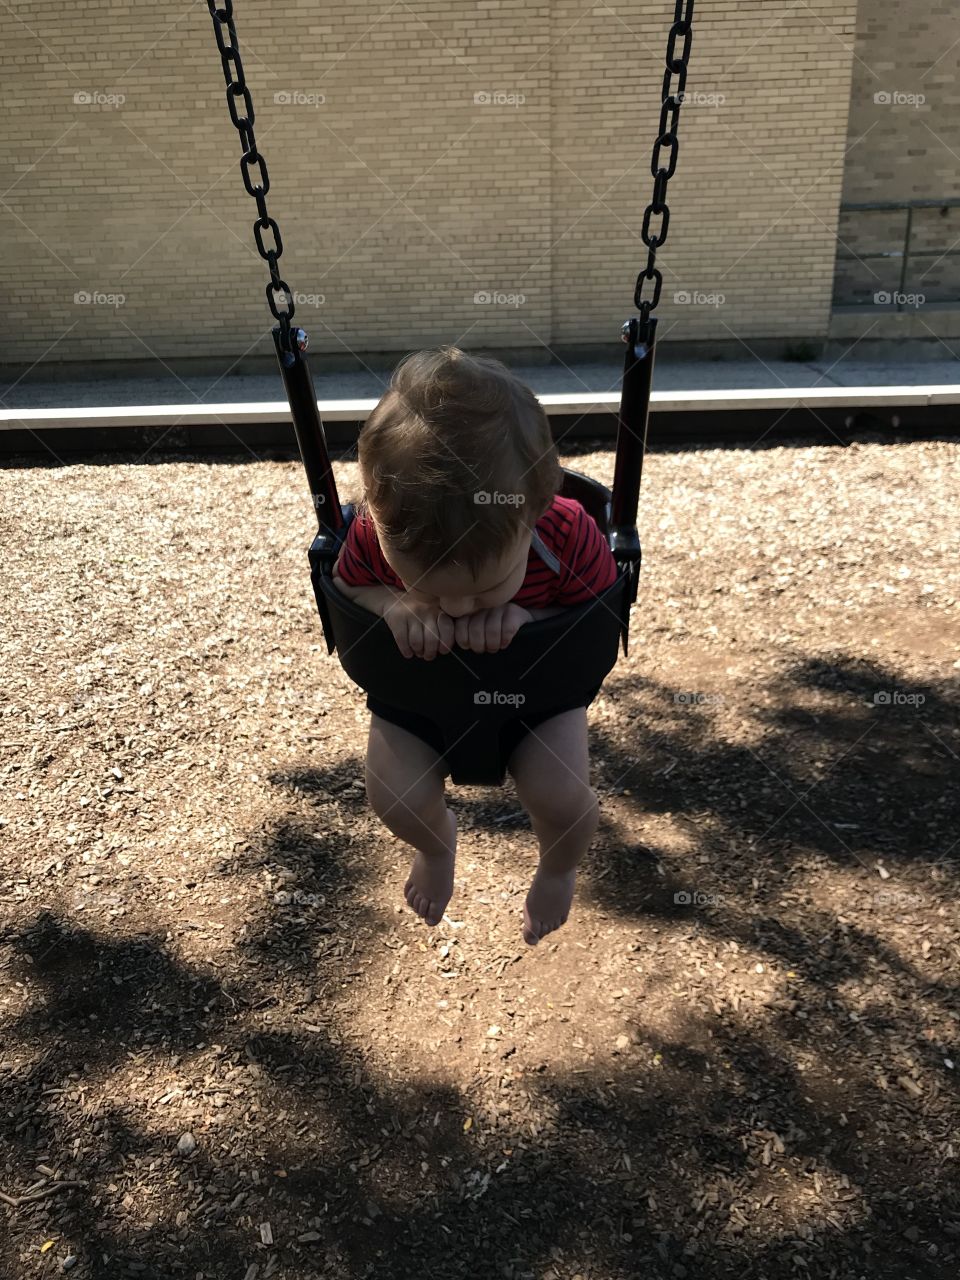 Not too sure about this swing